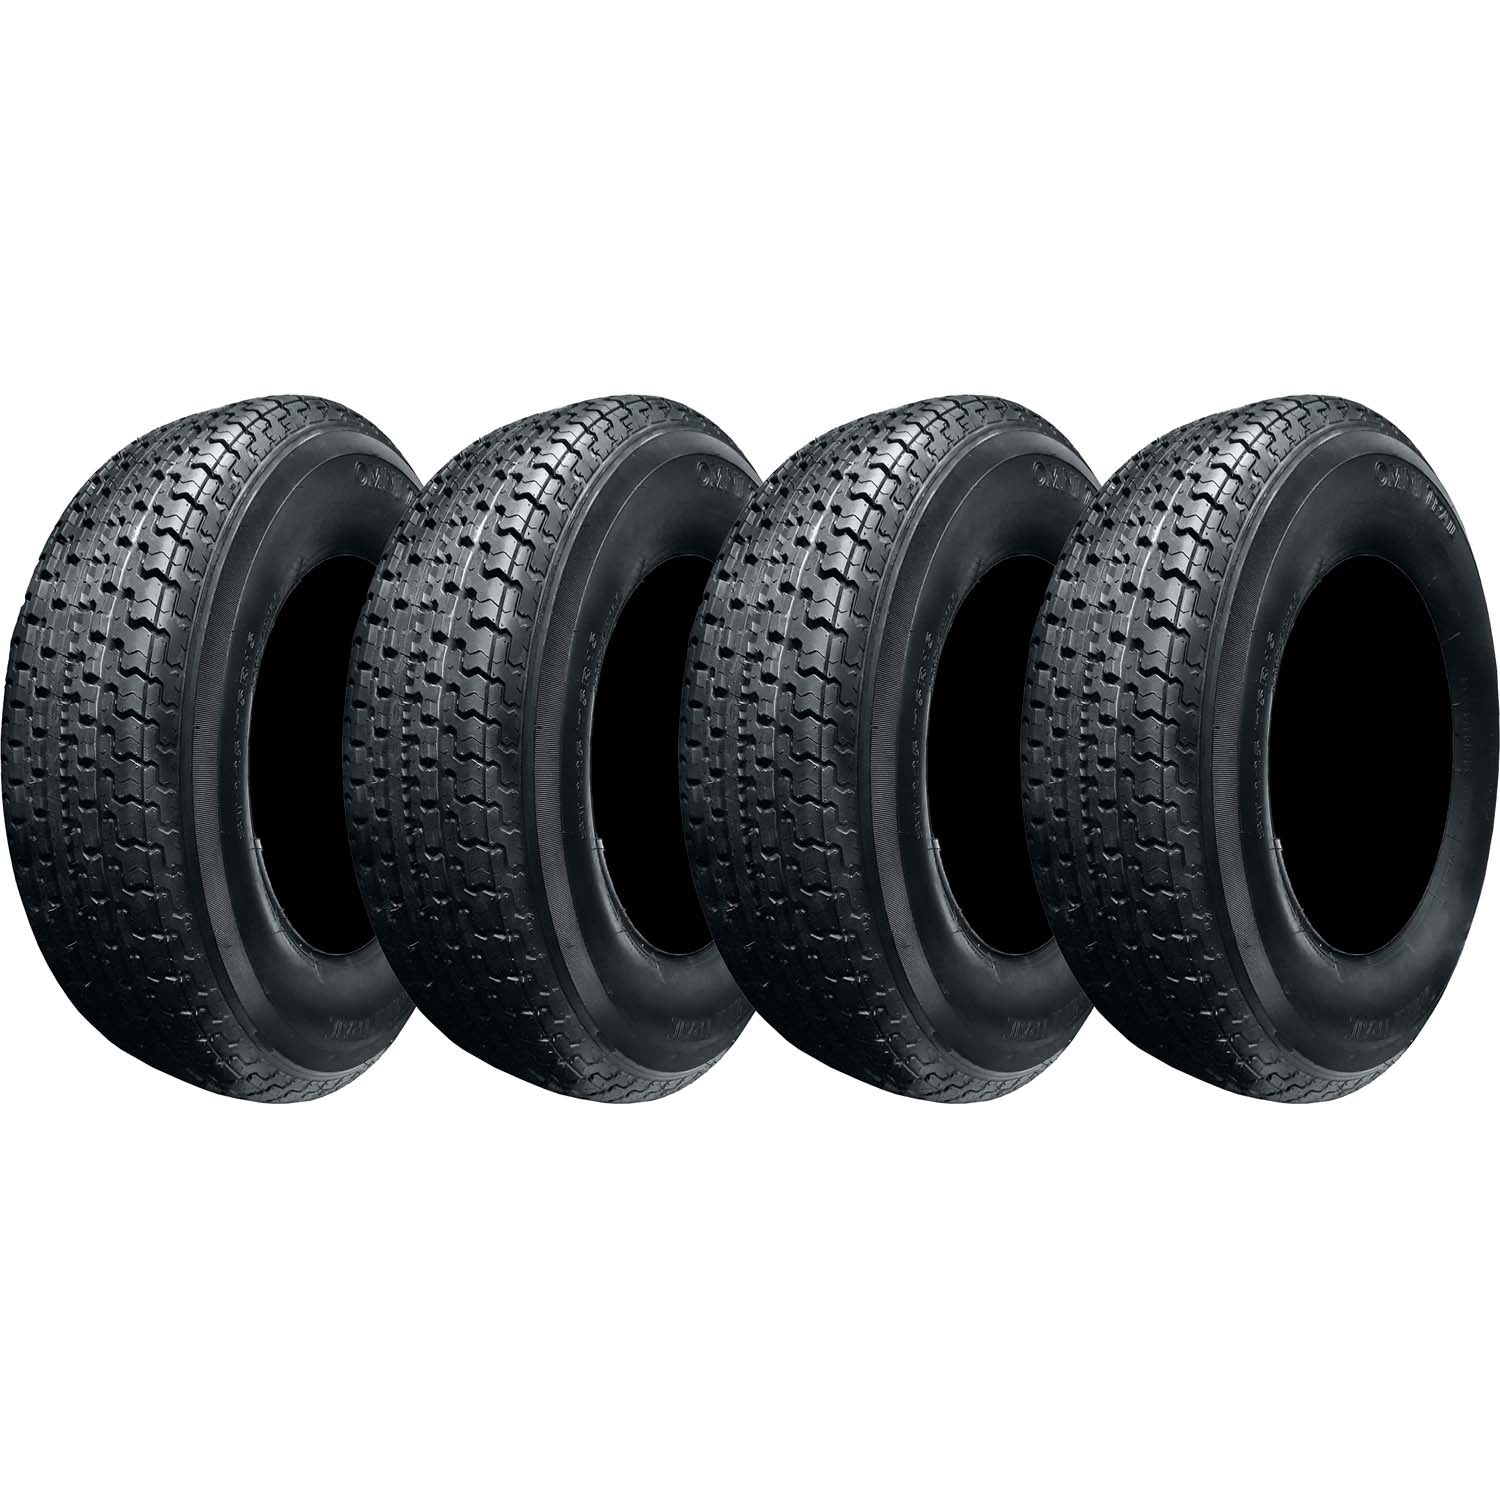 Omni Trail Radial Trailer Tire LRE 10ply ST235/80R16 Pack of 4